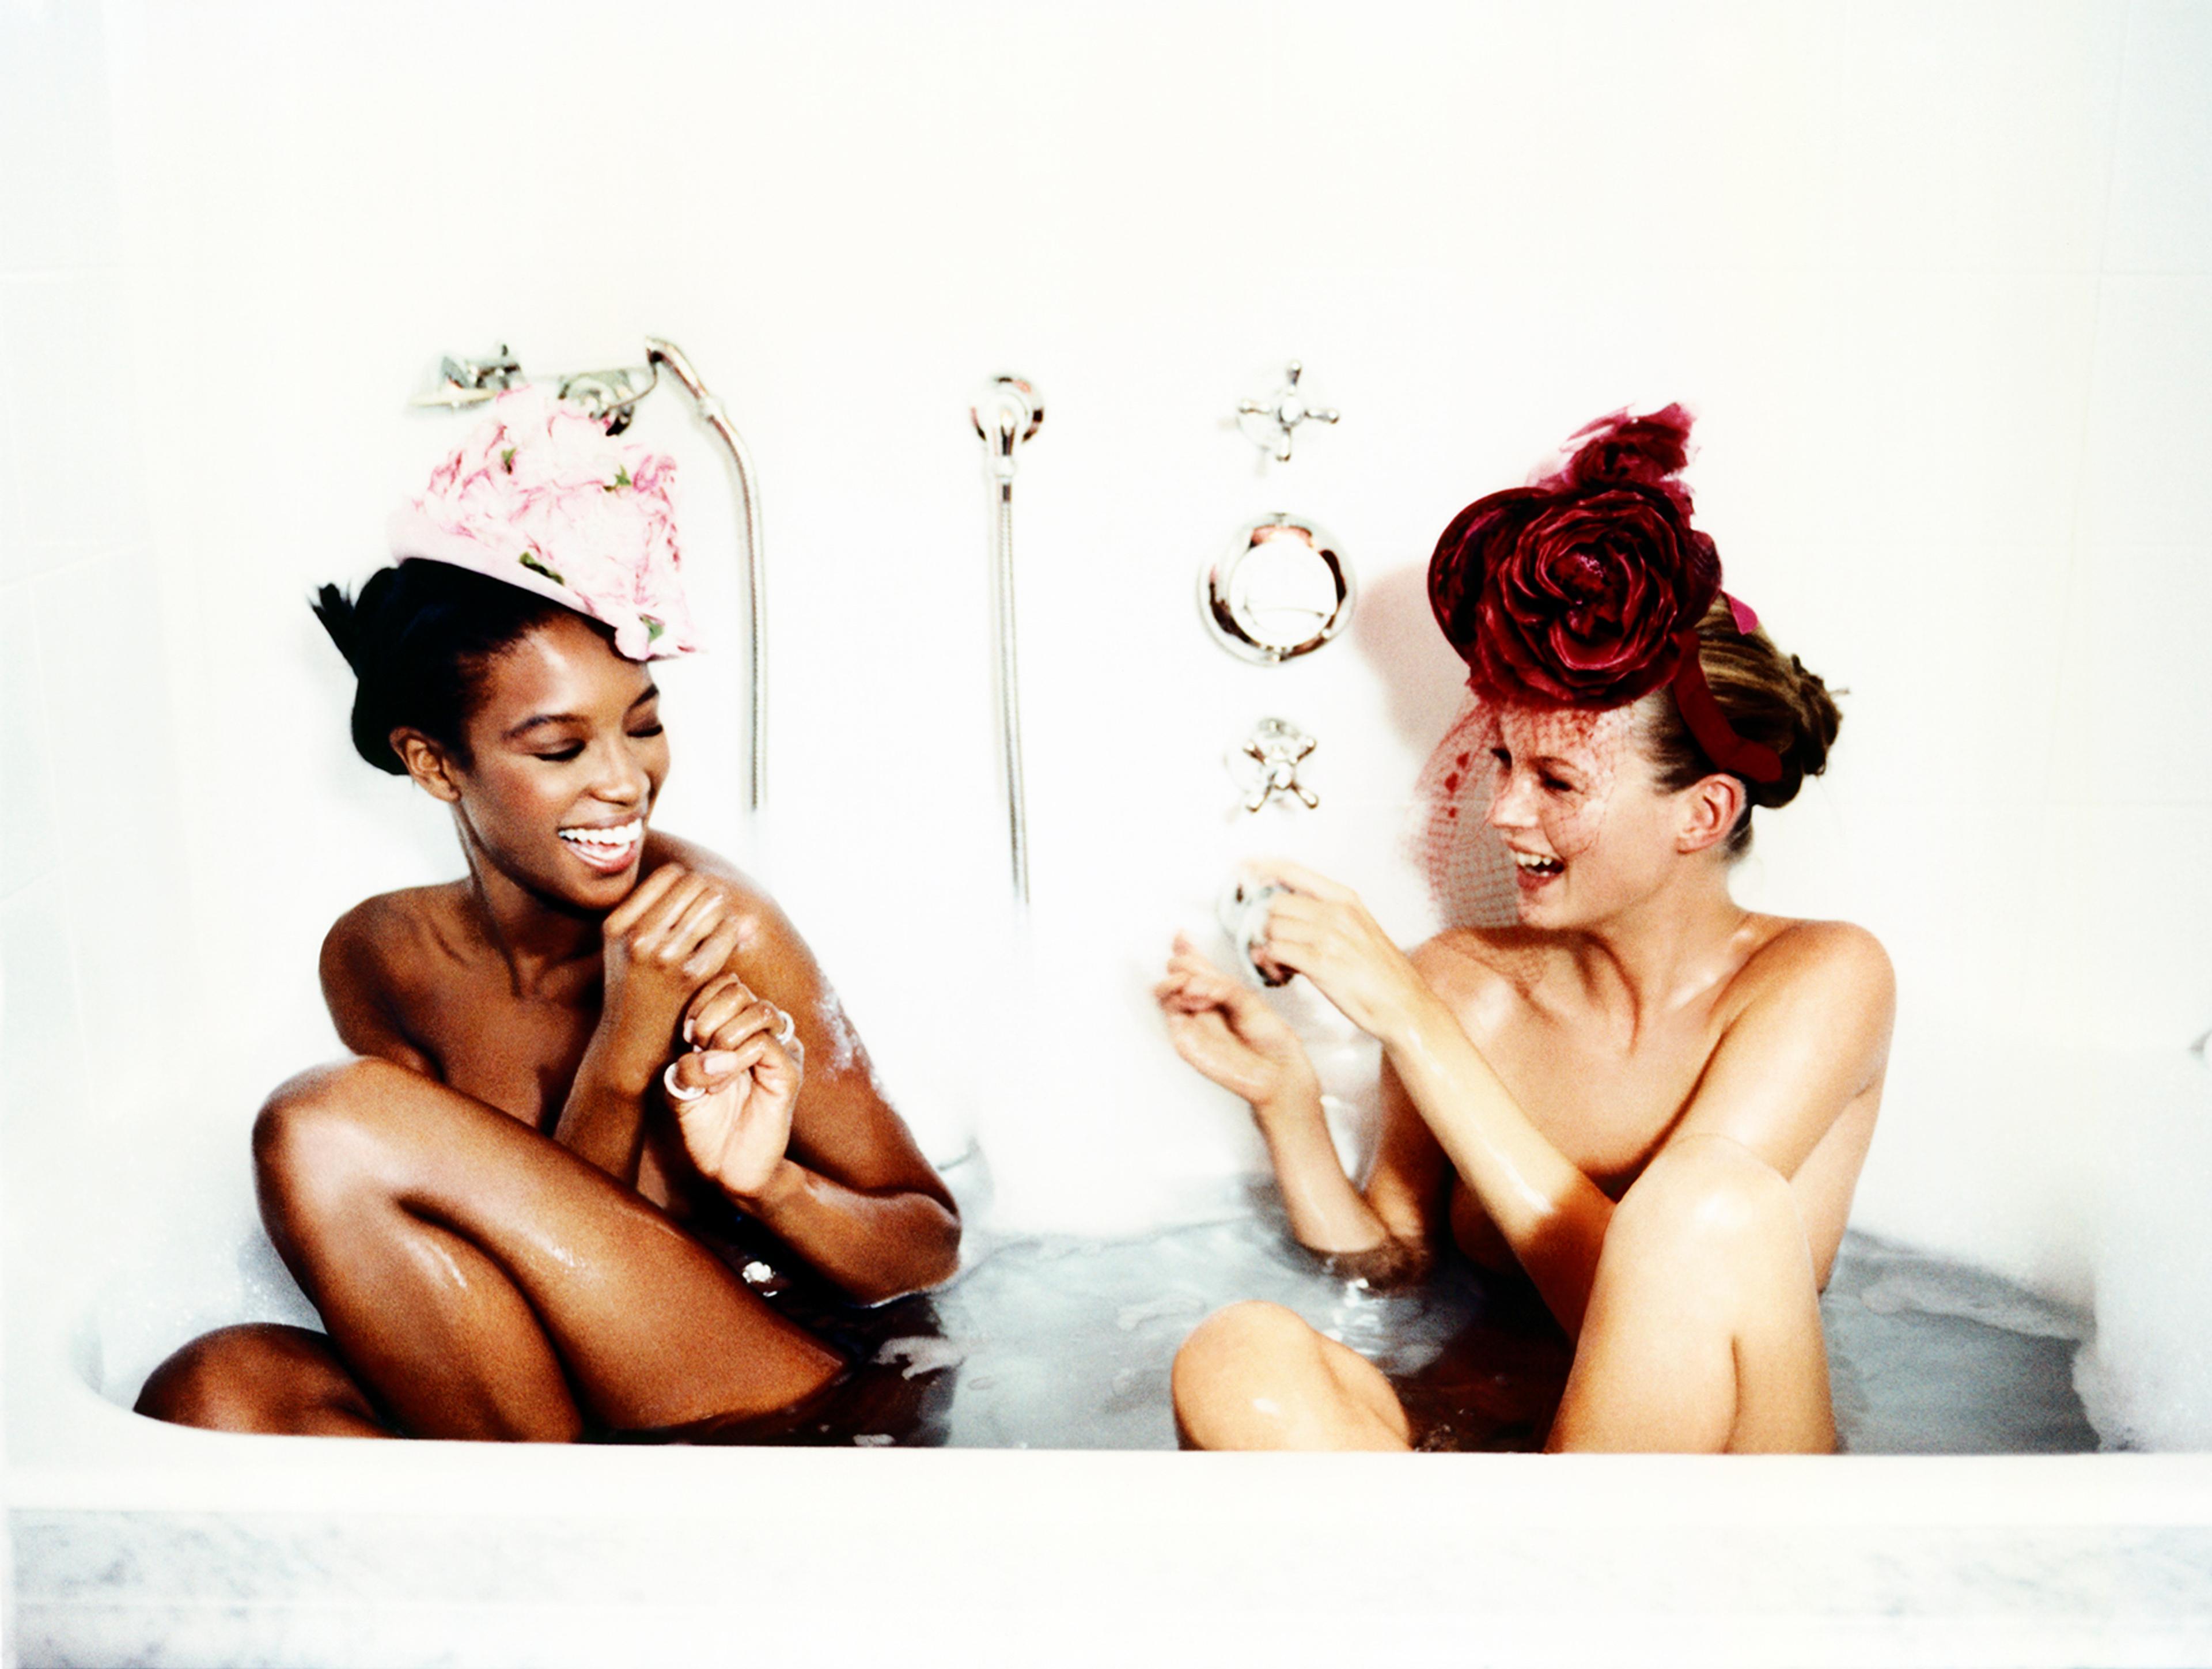 A photograph of two laughing women sharing a bath